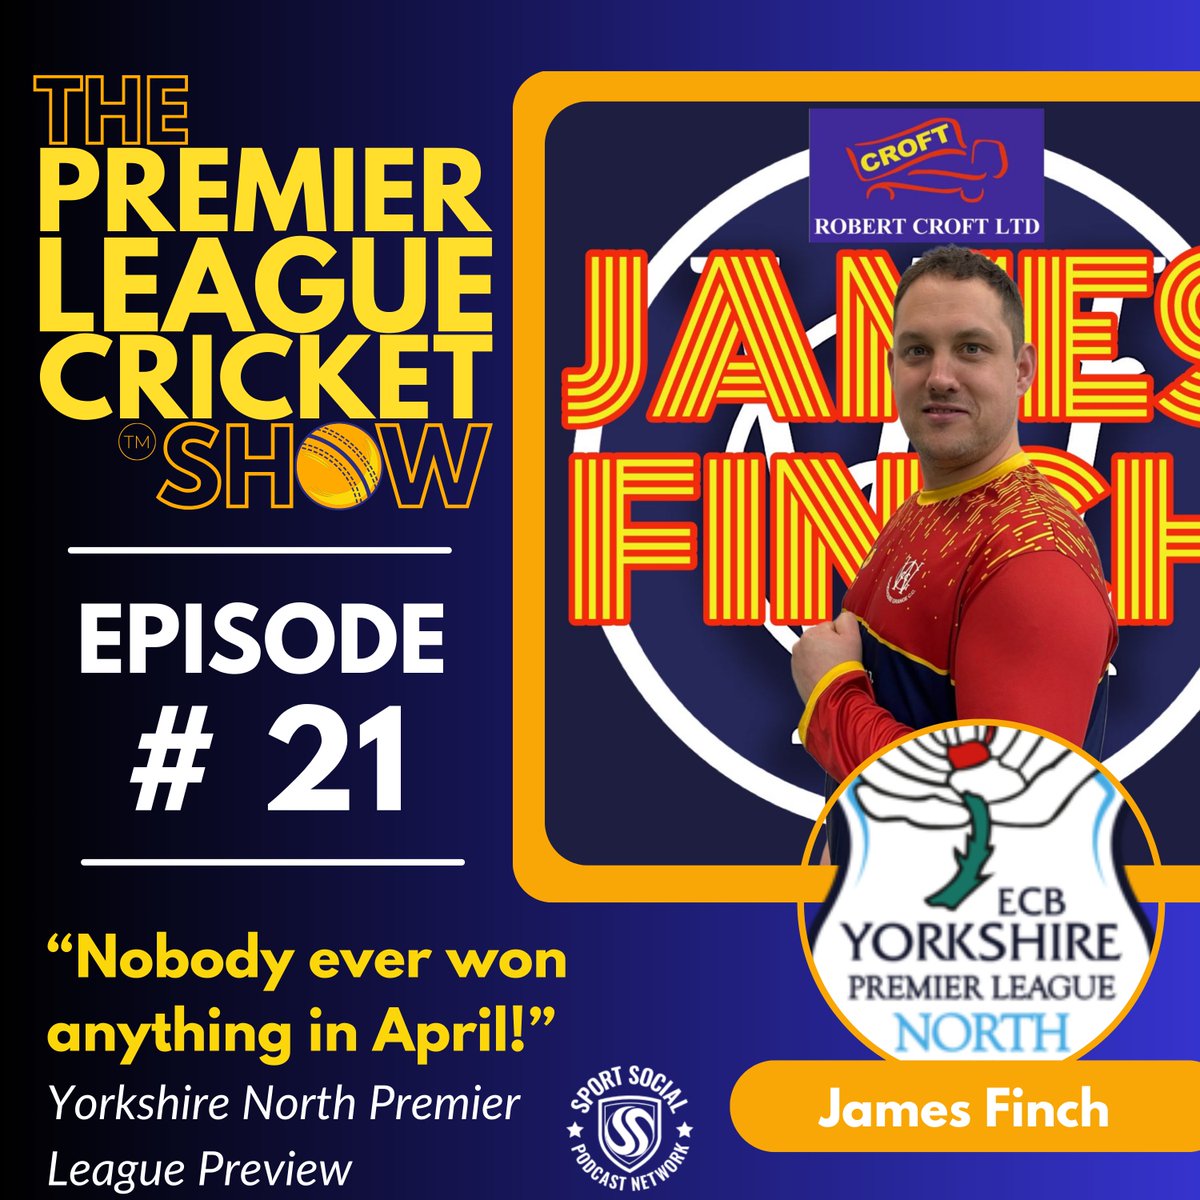 Ready for another #PremierLeague preview from The Premier League Cricket Show? Live and available now, ready for that morning commute, the preview of the @HuntersYLN with James Finch skipper of @WoodhouseGrange Like & Share around your club & cricketing network and don't